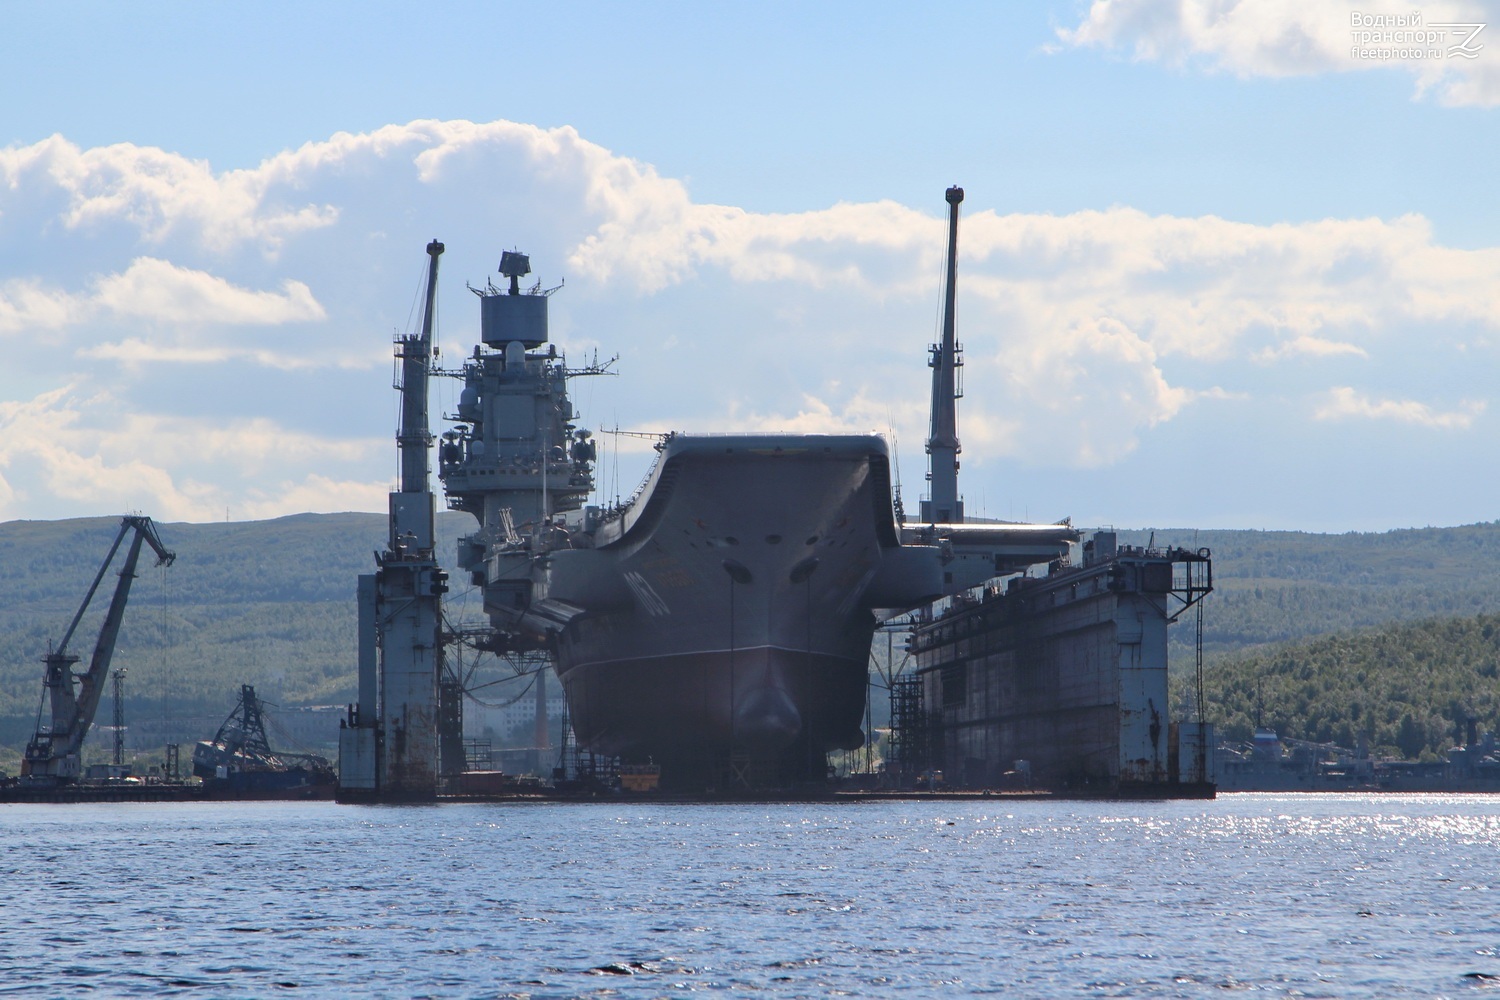 The reason for the flooding of the PD-50 dock could be the optimization of the team - Aircraft carrier Kuznetsov, Russia, Repair, Optimization, , Crash, Murmansk, 